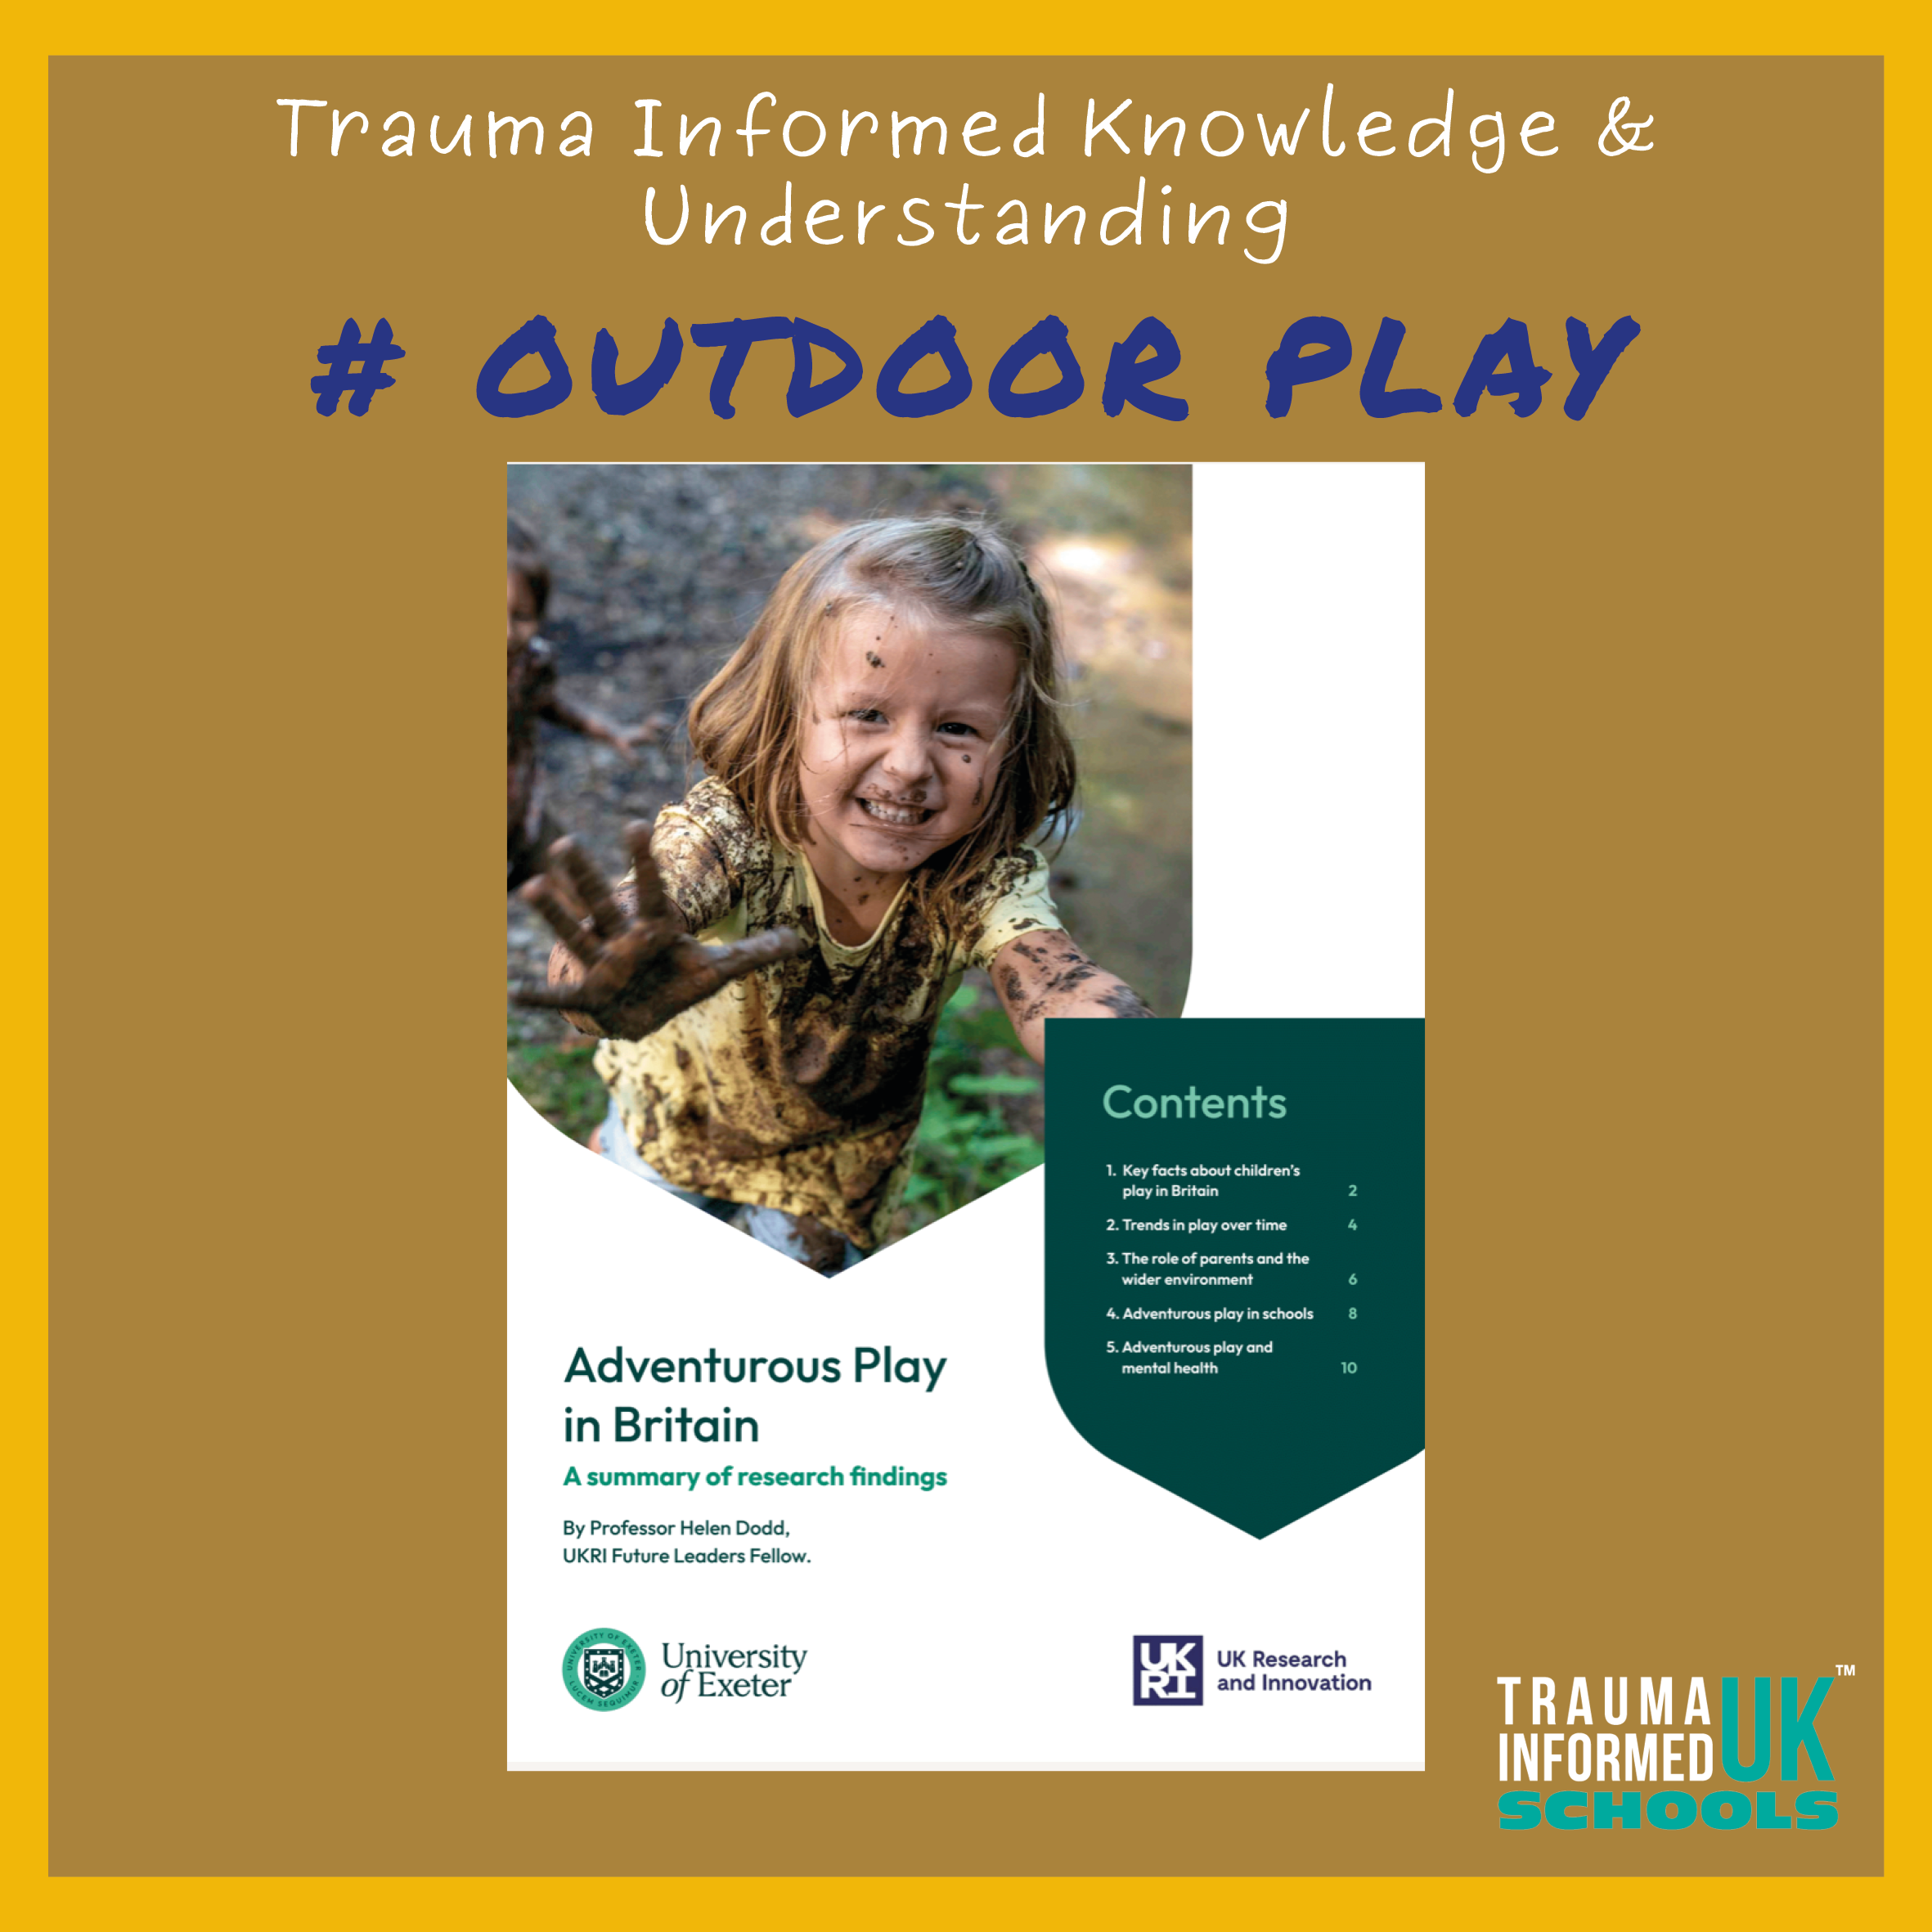 Trauma Informed Knowledge outdoor play report